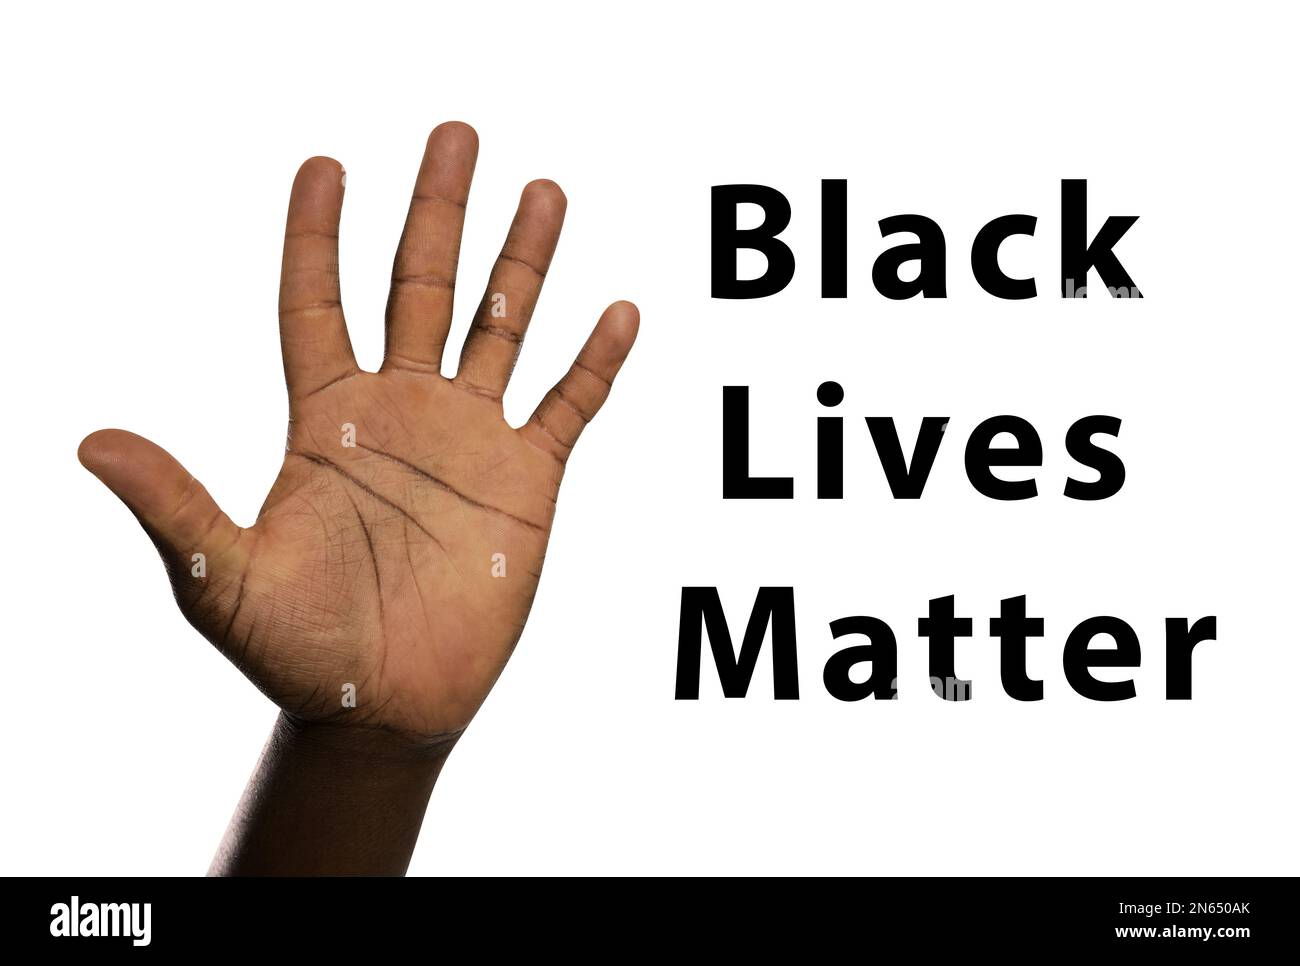 Black Lives Matter. African-American man showing hand on white background, closeup Stock Photo